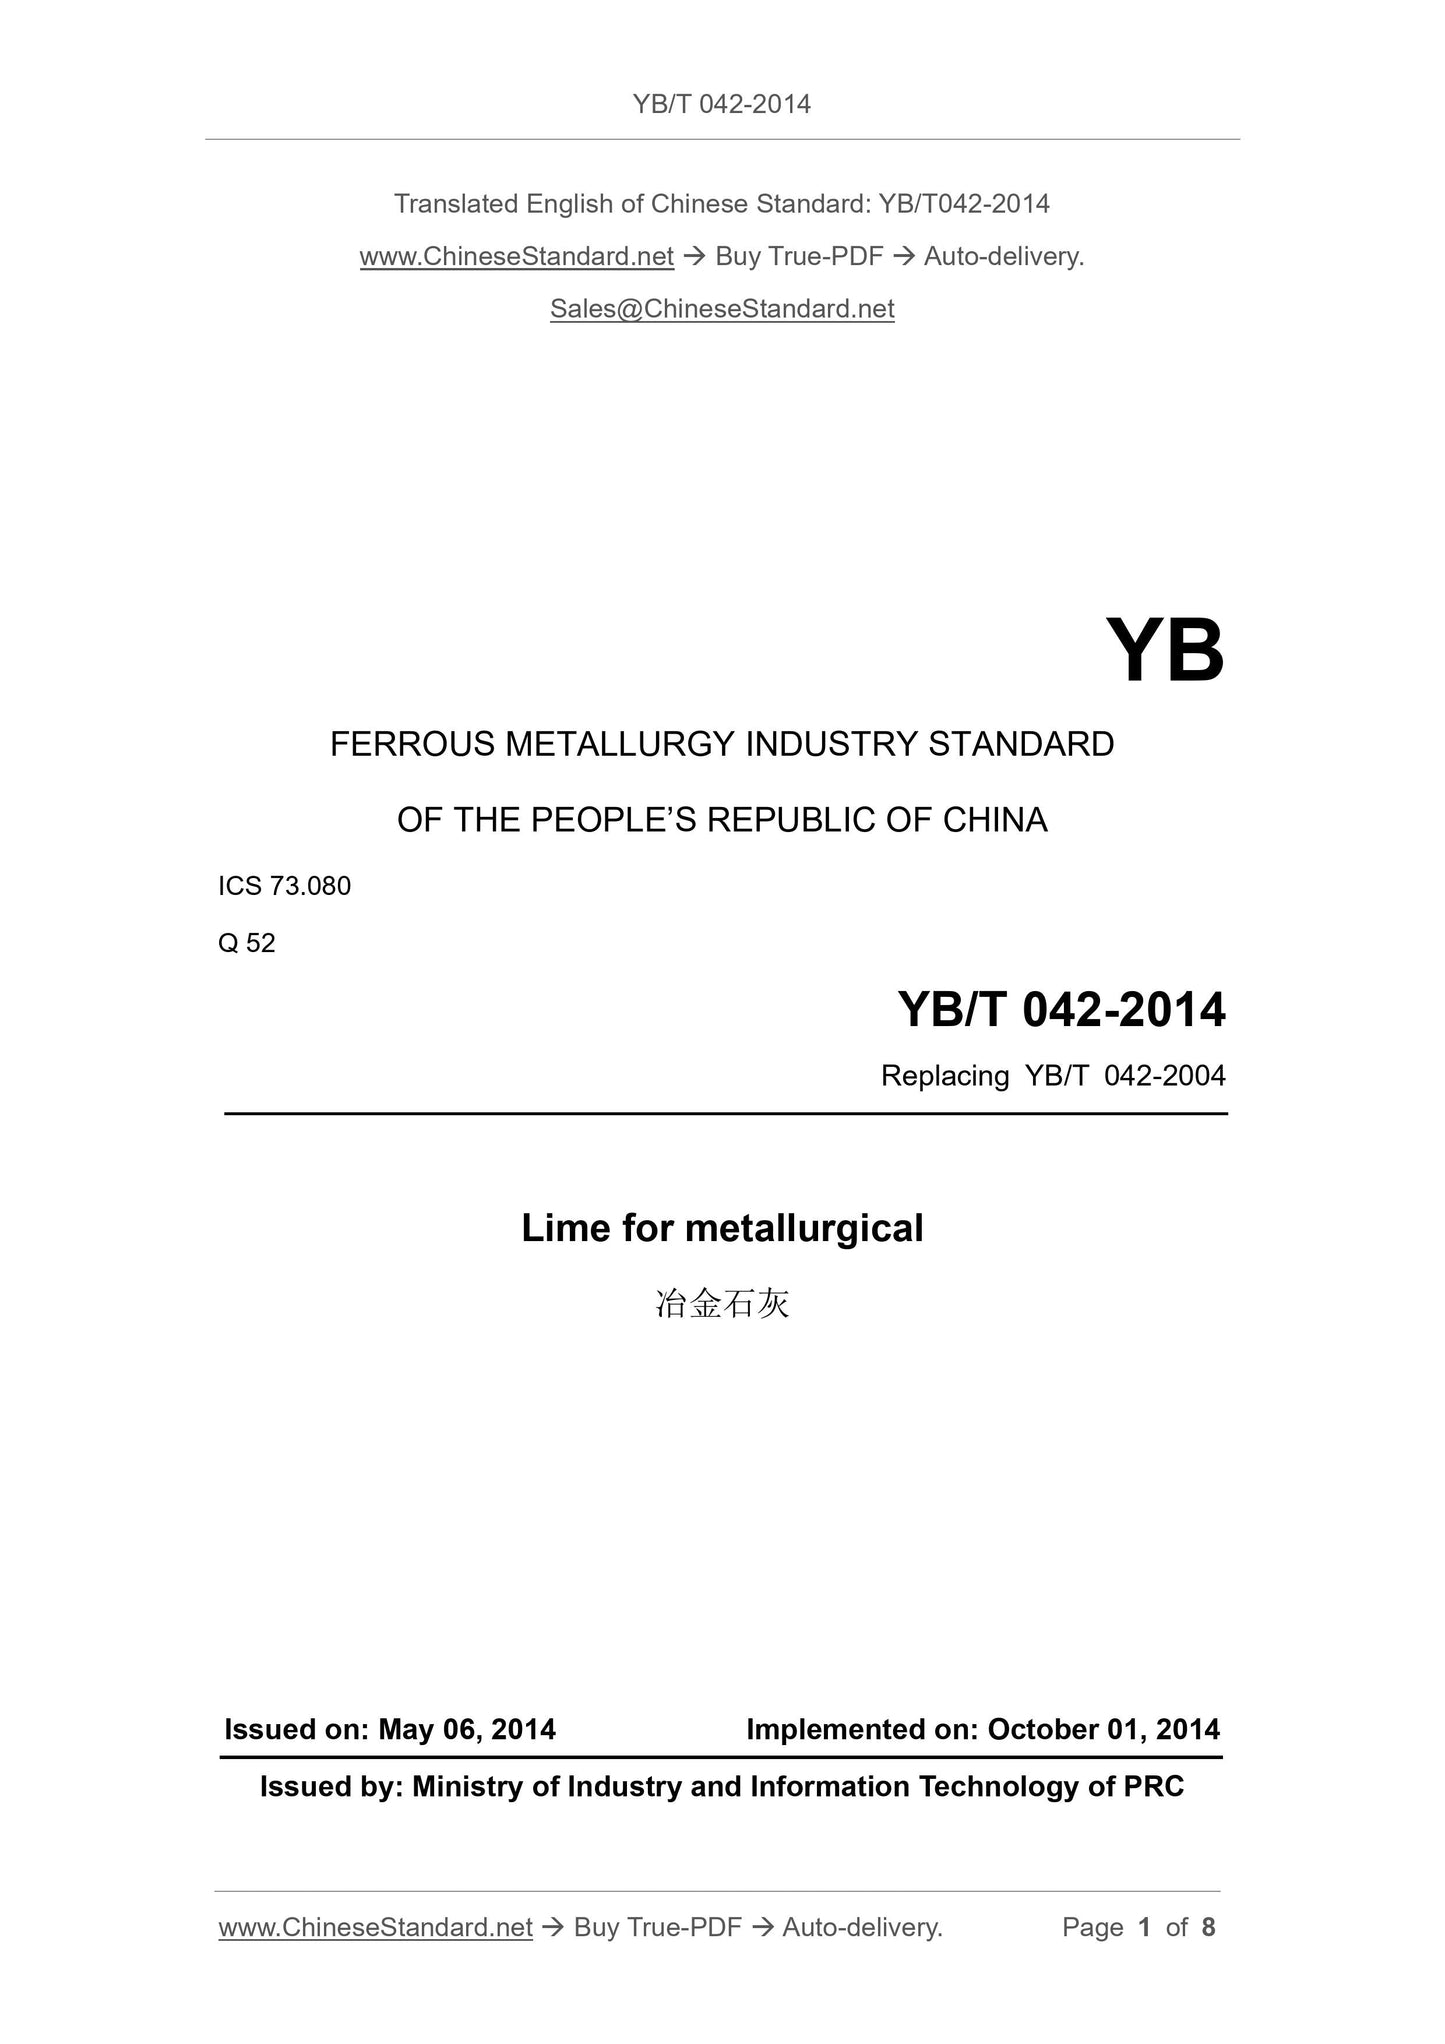 YB/T 042-2014 Page 1